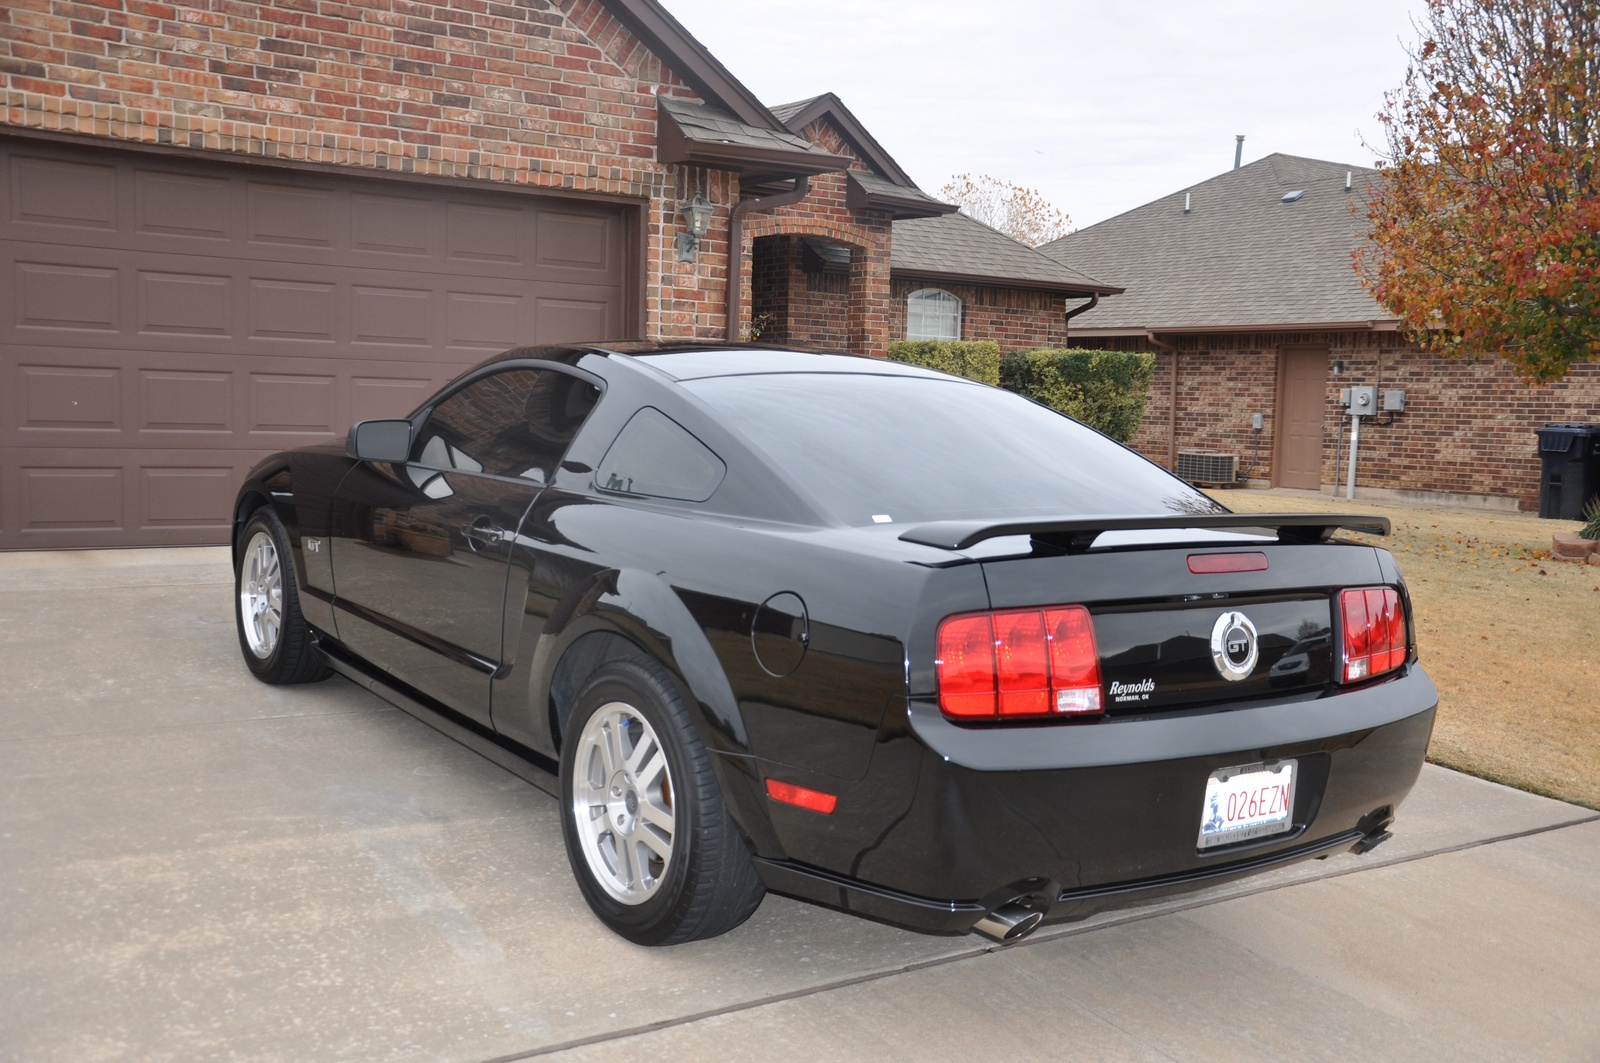 2005 Ford mustang gt convertible 0-60 #3